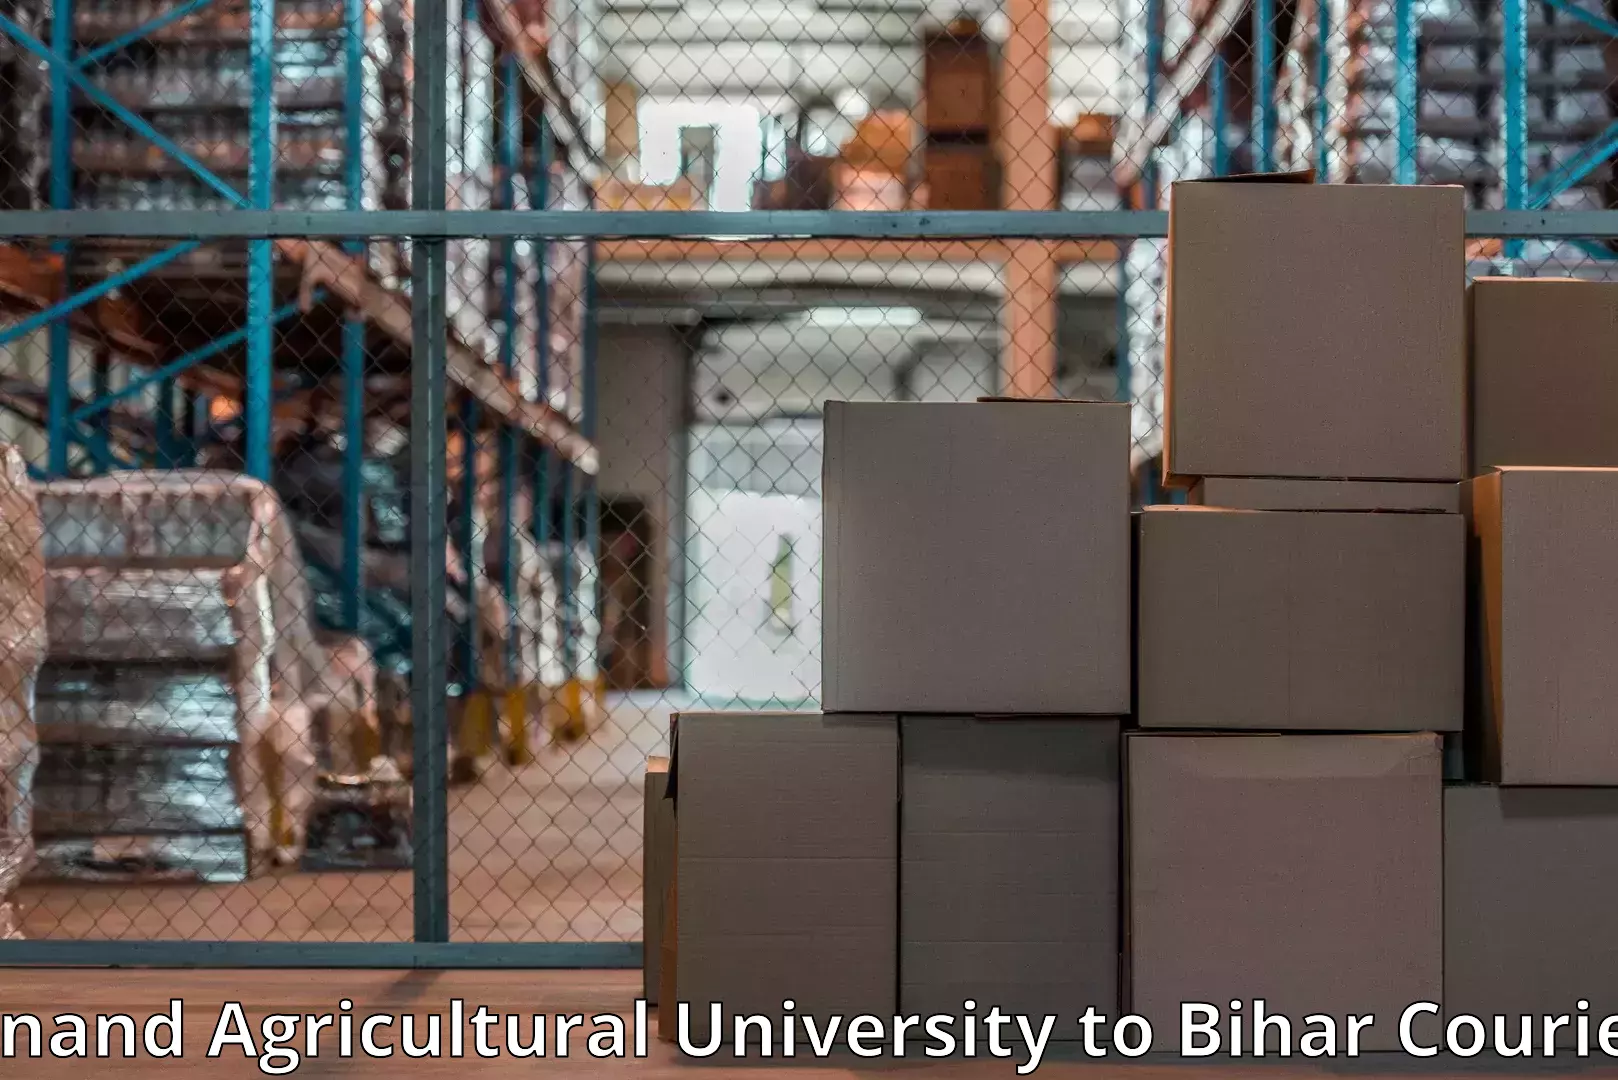 Trusted moving company Anand Agricultural University to Bihar